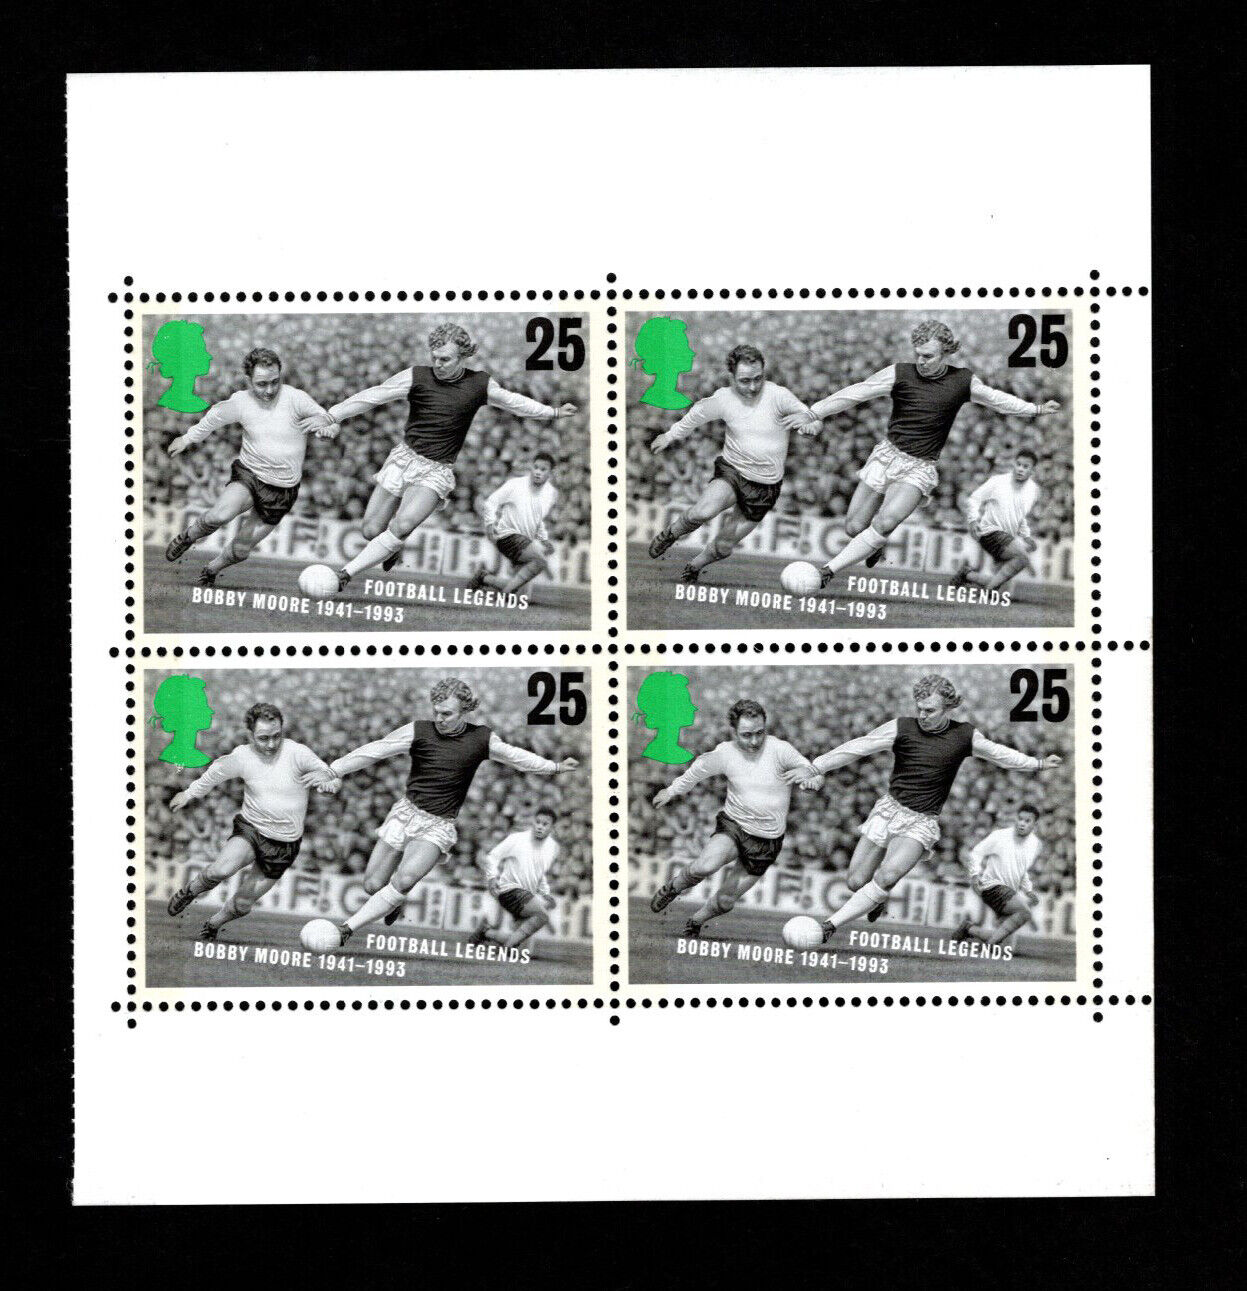 Great Britain,  Sc #1664a, MNH, 1996, Pane of four, Soccer, BOBB